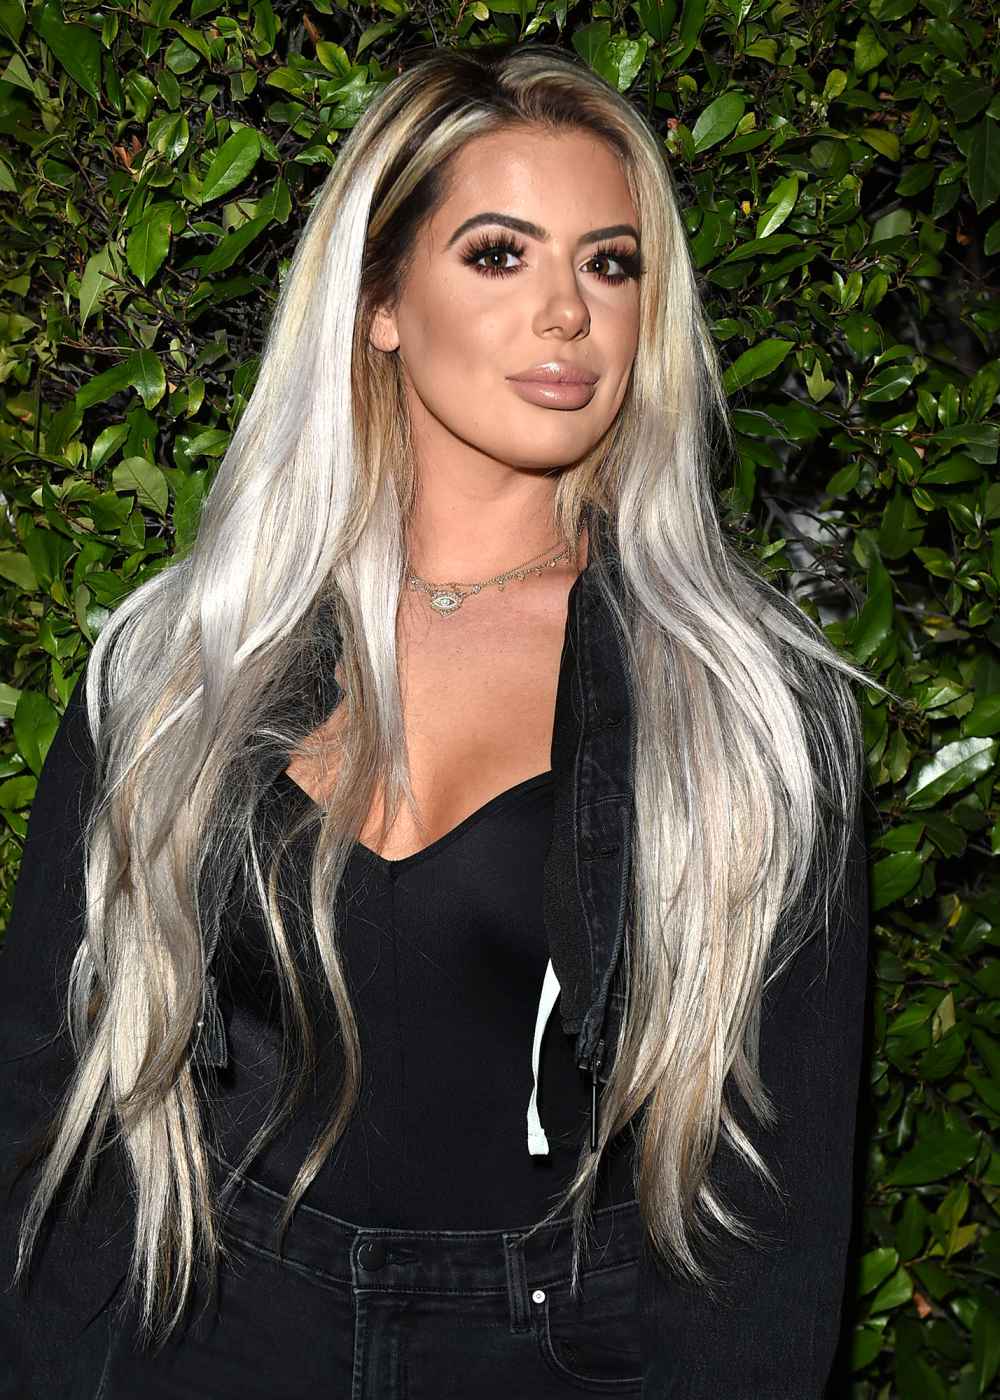 Brielle Biermann Says Dissolving Her Lip Filler Was the ‘Best Thing I Ever Did’